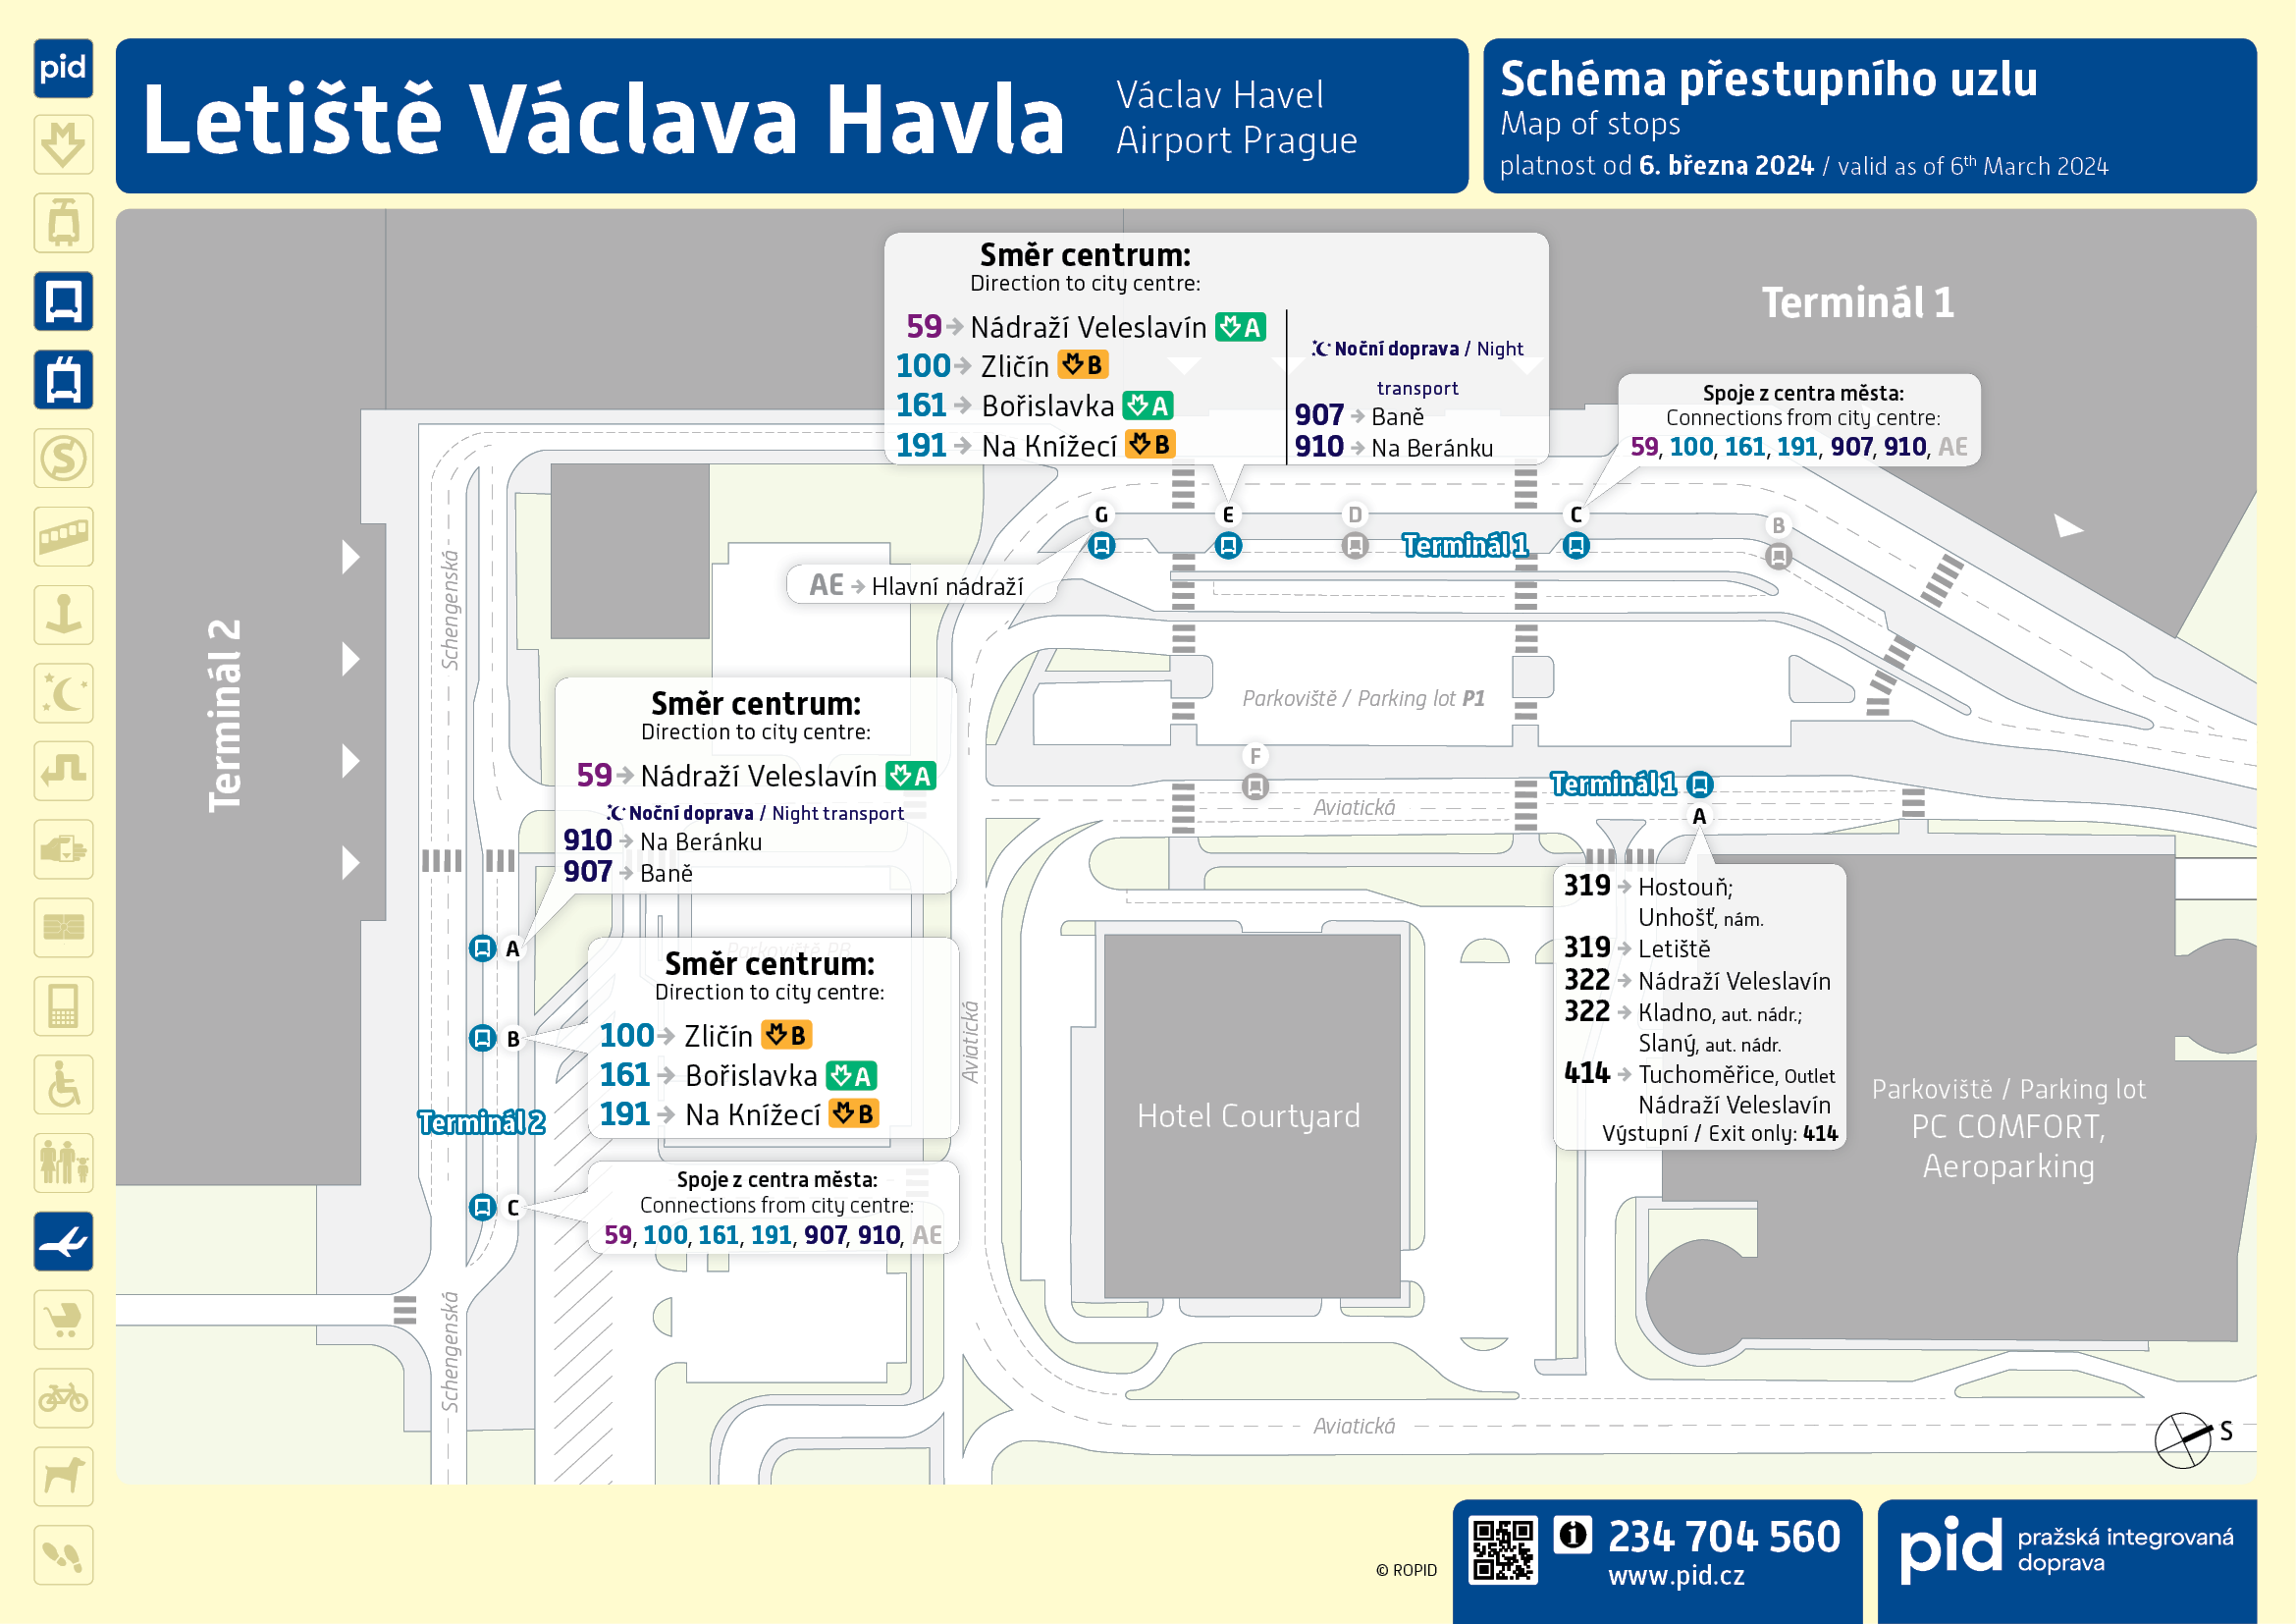 Schematic map of the stops at Prague-Ruzyně airport